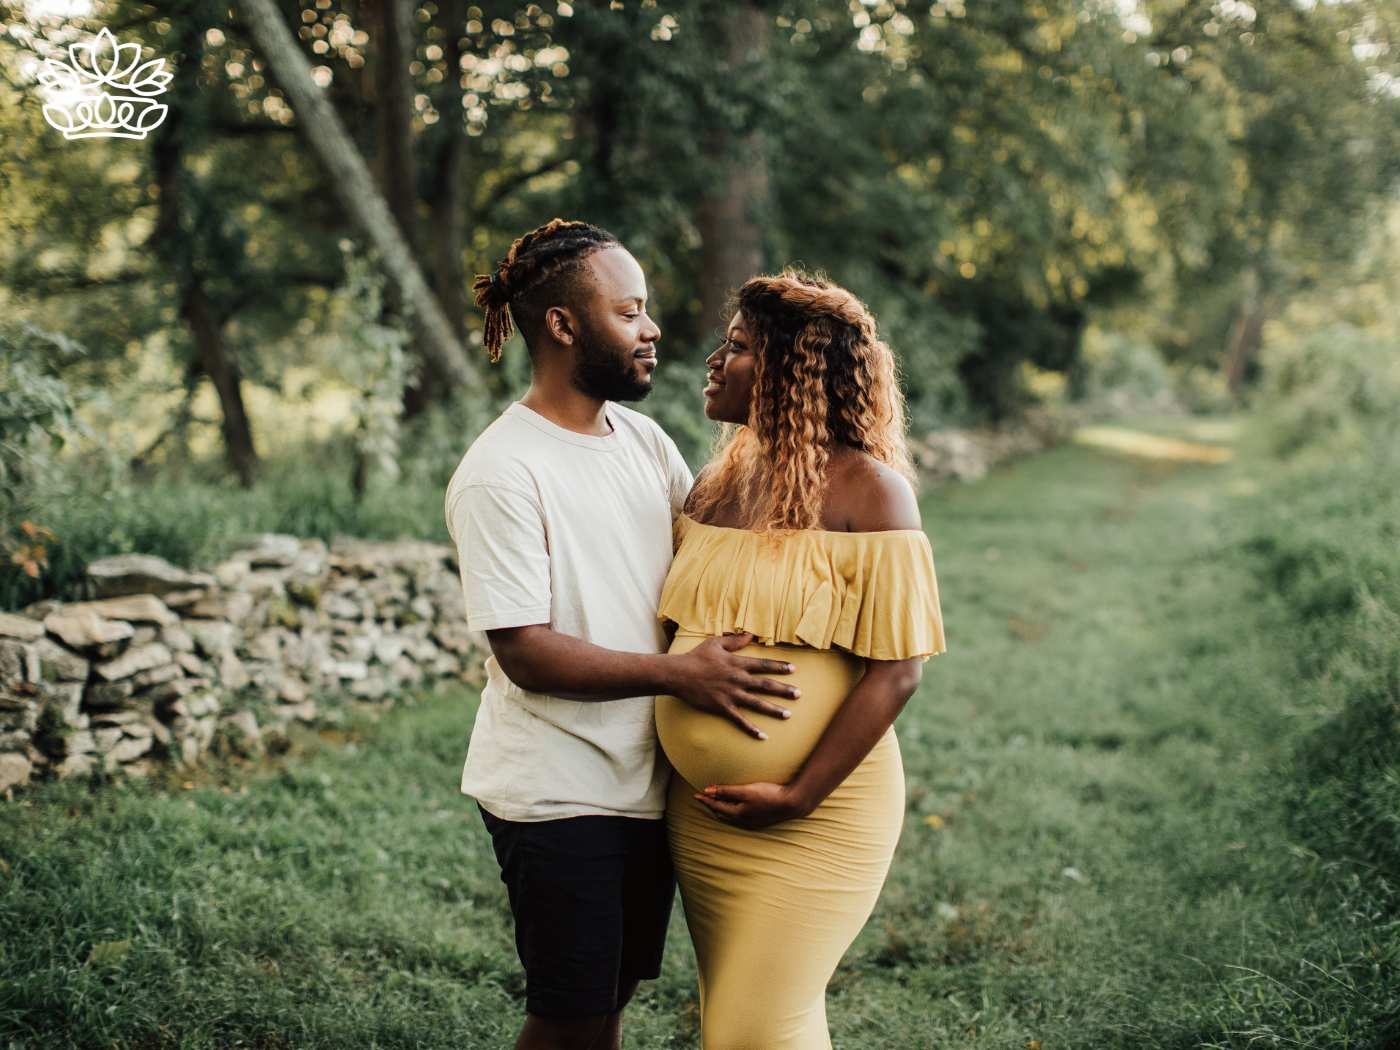 A tender moment captured in a serene outdoor setting, with a man gently holding his pregnant partner, who is radiant in a yellow dress. They share a loving gaze, surrounded by the natural beauty of a lush green landscape. A heartwarming scene for celebrating new beginnings with Fabulous Flowers and Gifts. Gift Boxes for wife. Delivered with Heart.